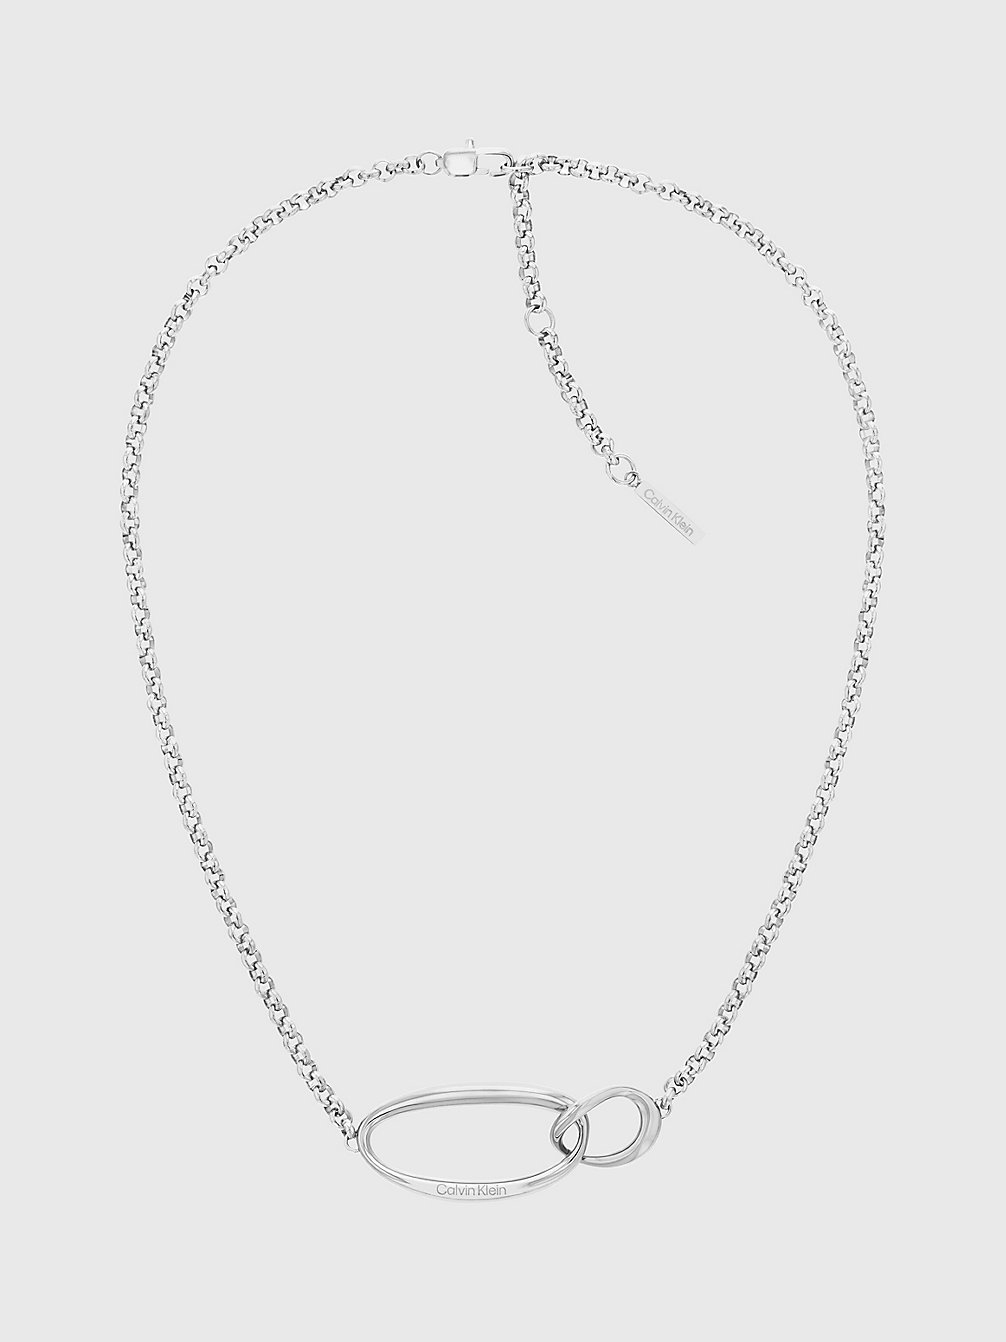 Collar - Playful Organic Shapes > SILVER > undefined mujer > Calvin Klein